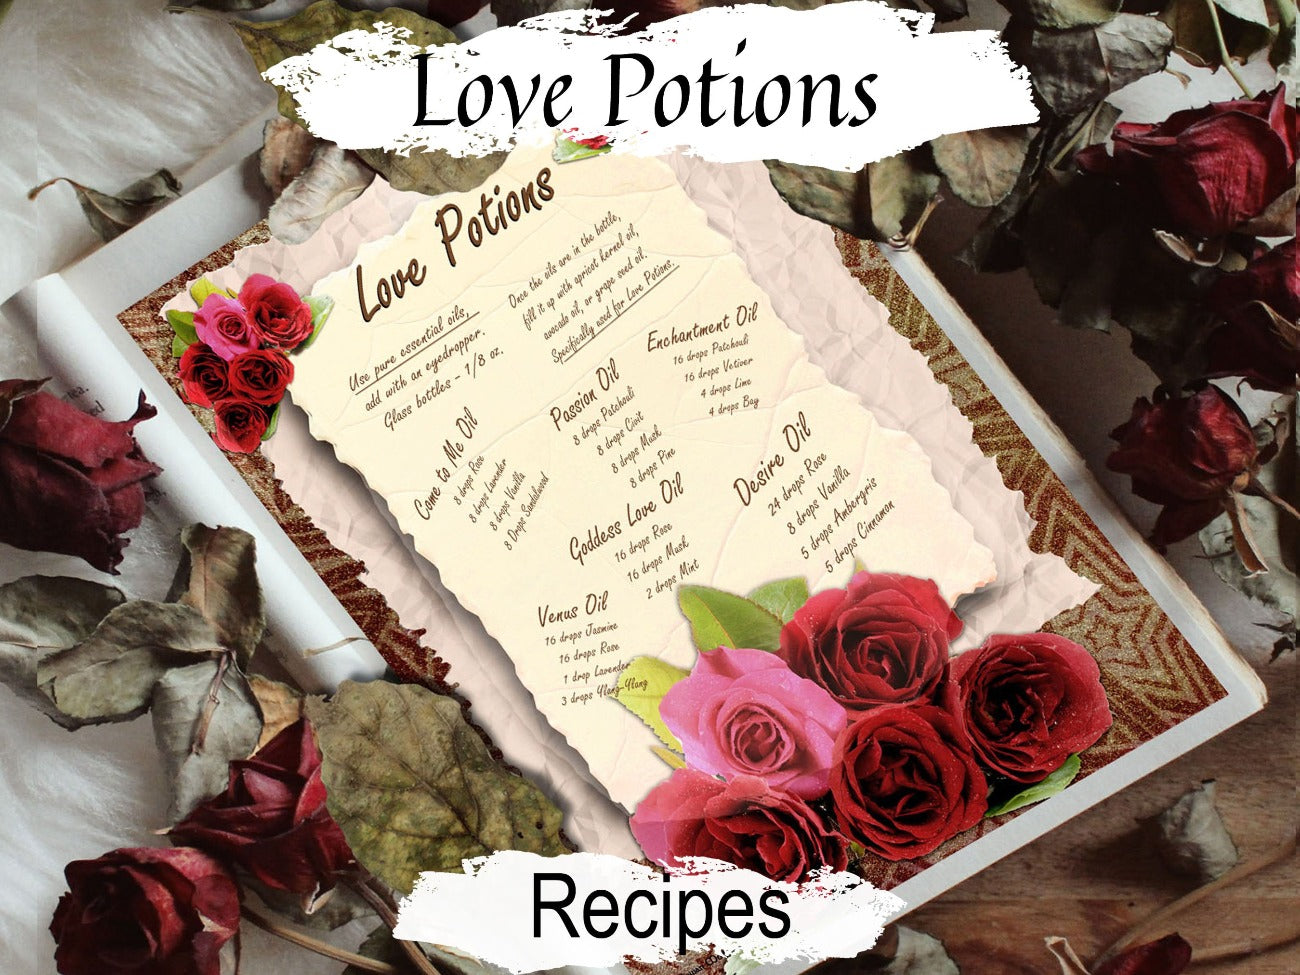 LOVE POTION Recipes, Love Magic Charms, Valentine Love Aromatherapy, Herb Apothecary, Love Essential Oils, Love Potion Number Nine Grimoire - Morgana Magick Spell